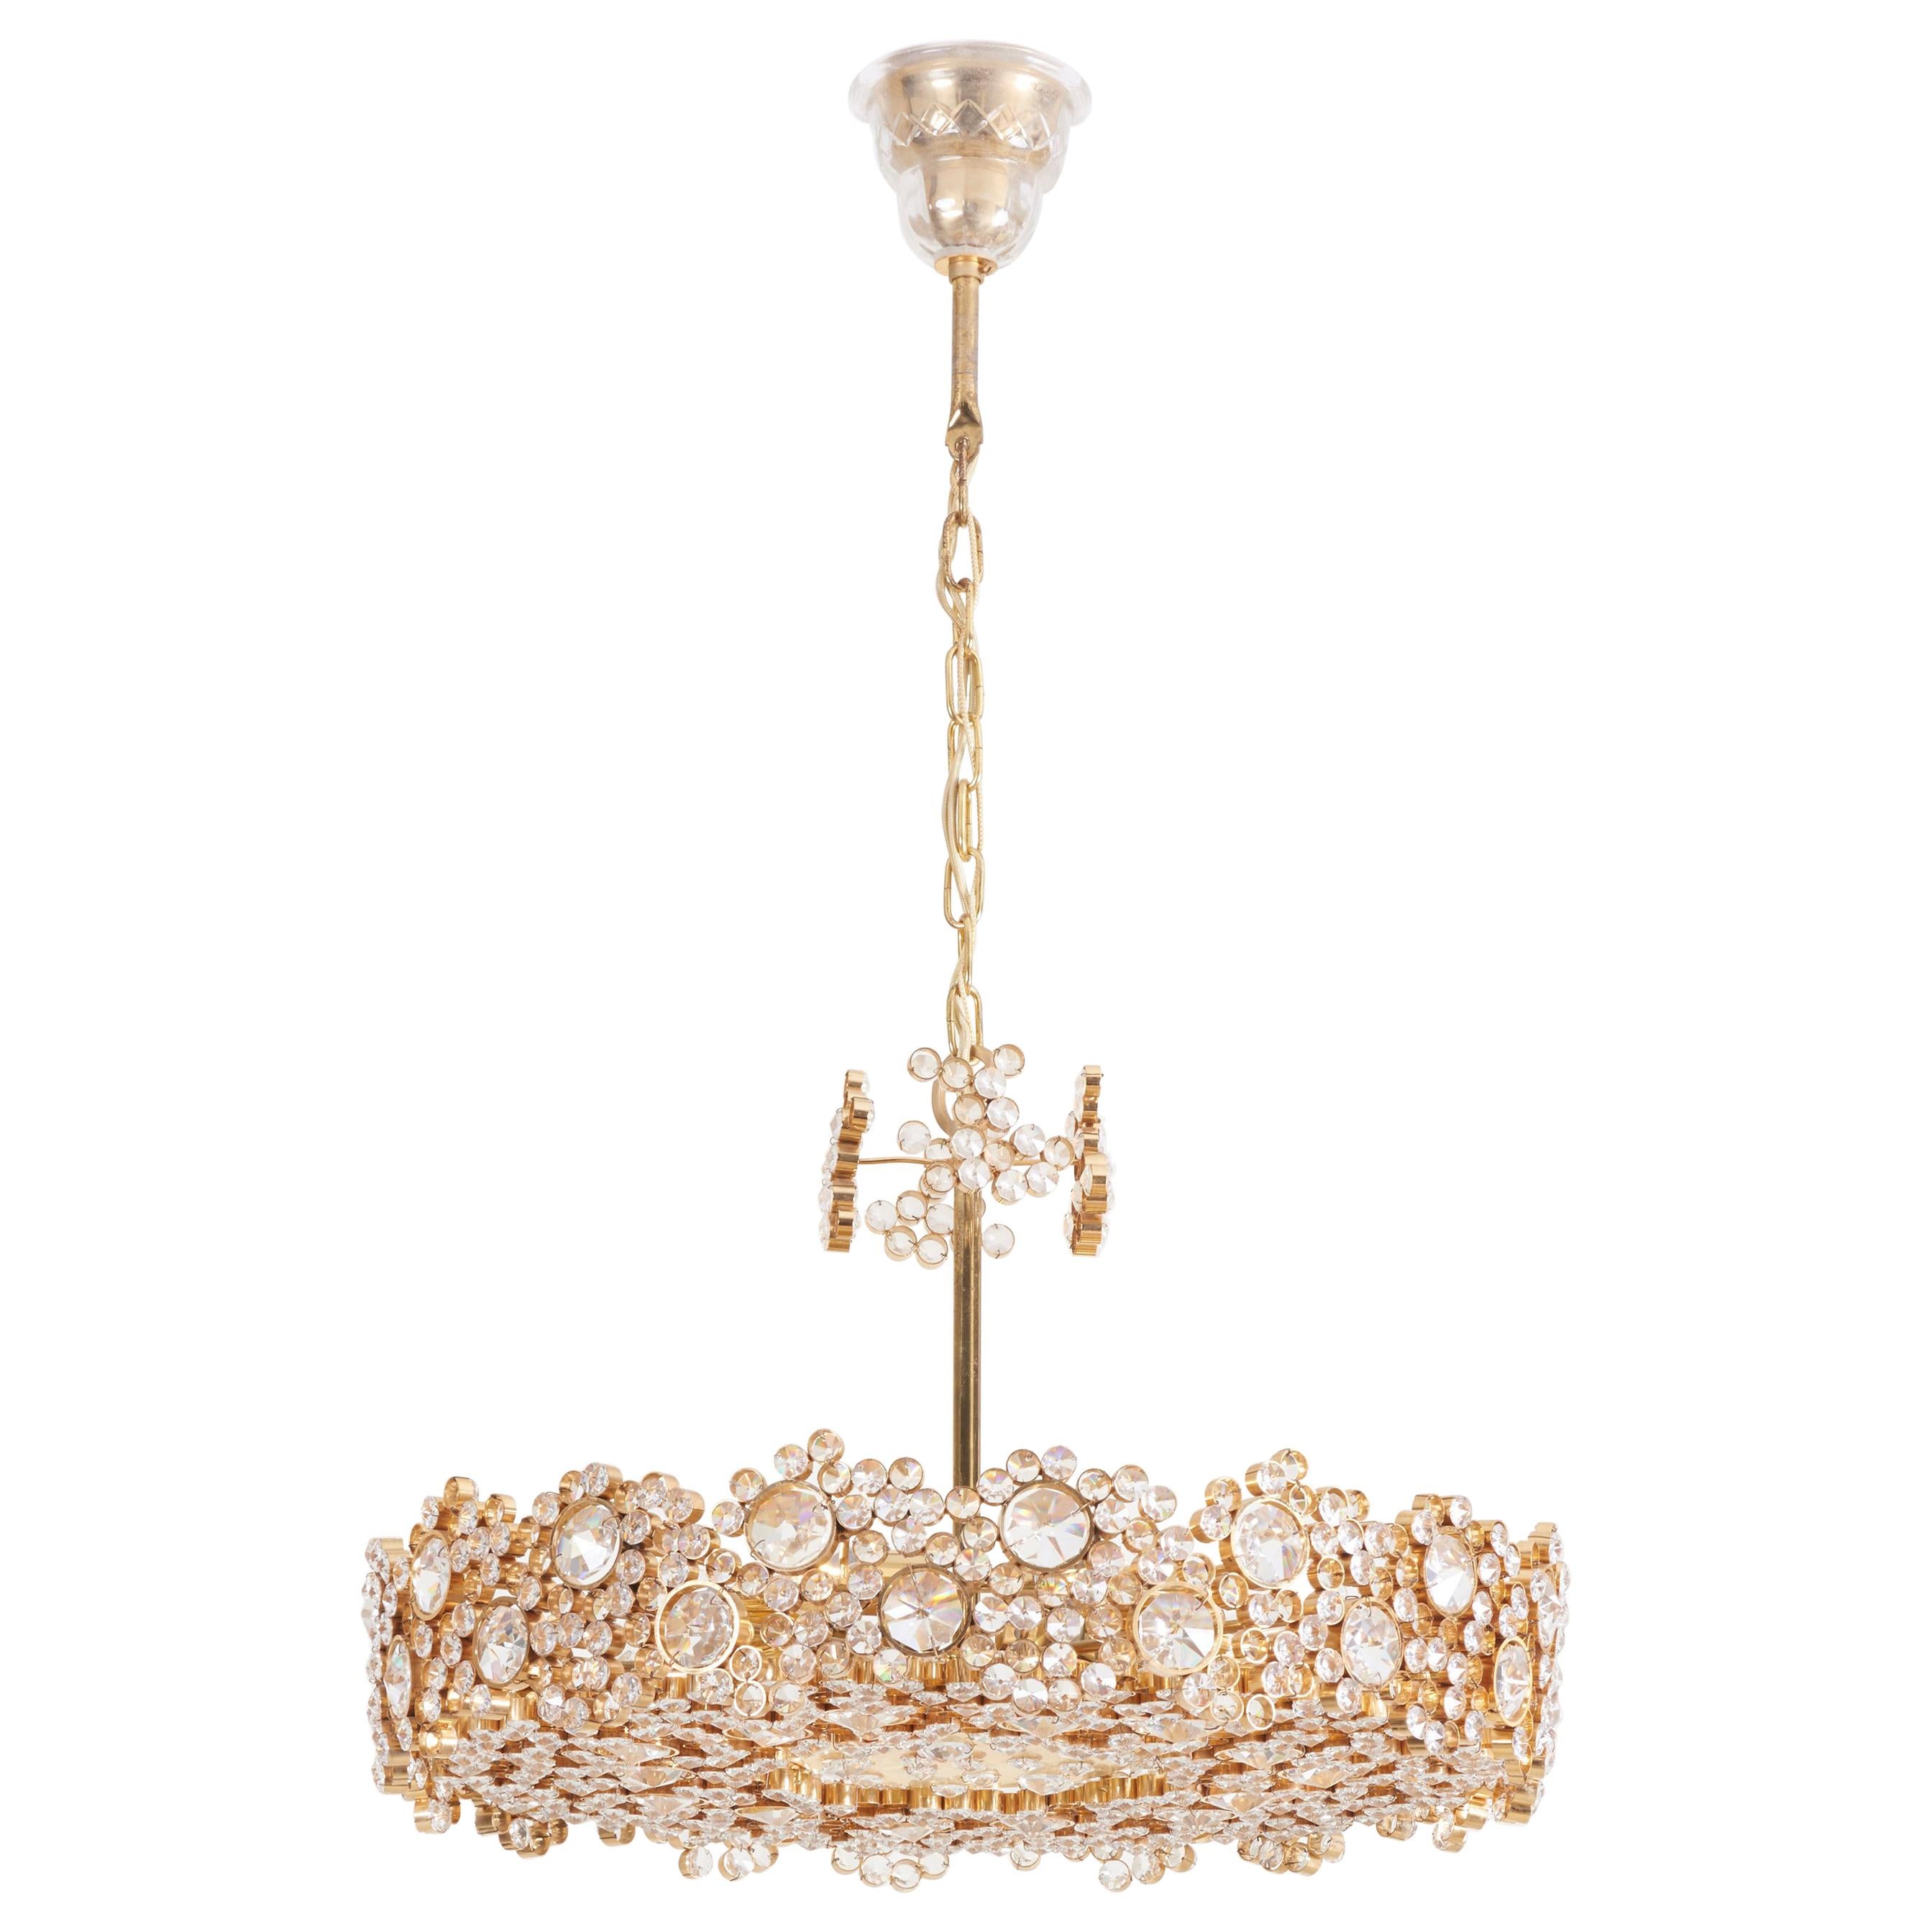 One of Seven Palwa Brass and Crystal Glass Encrusted Chandeliers, Model S101 For Sale